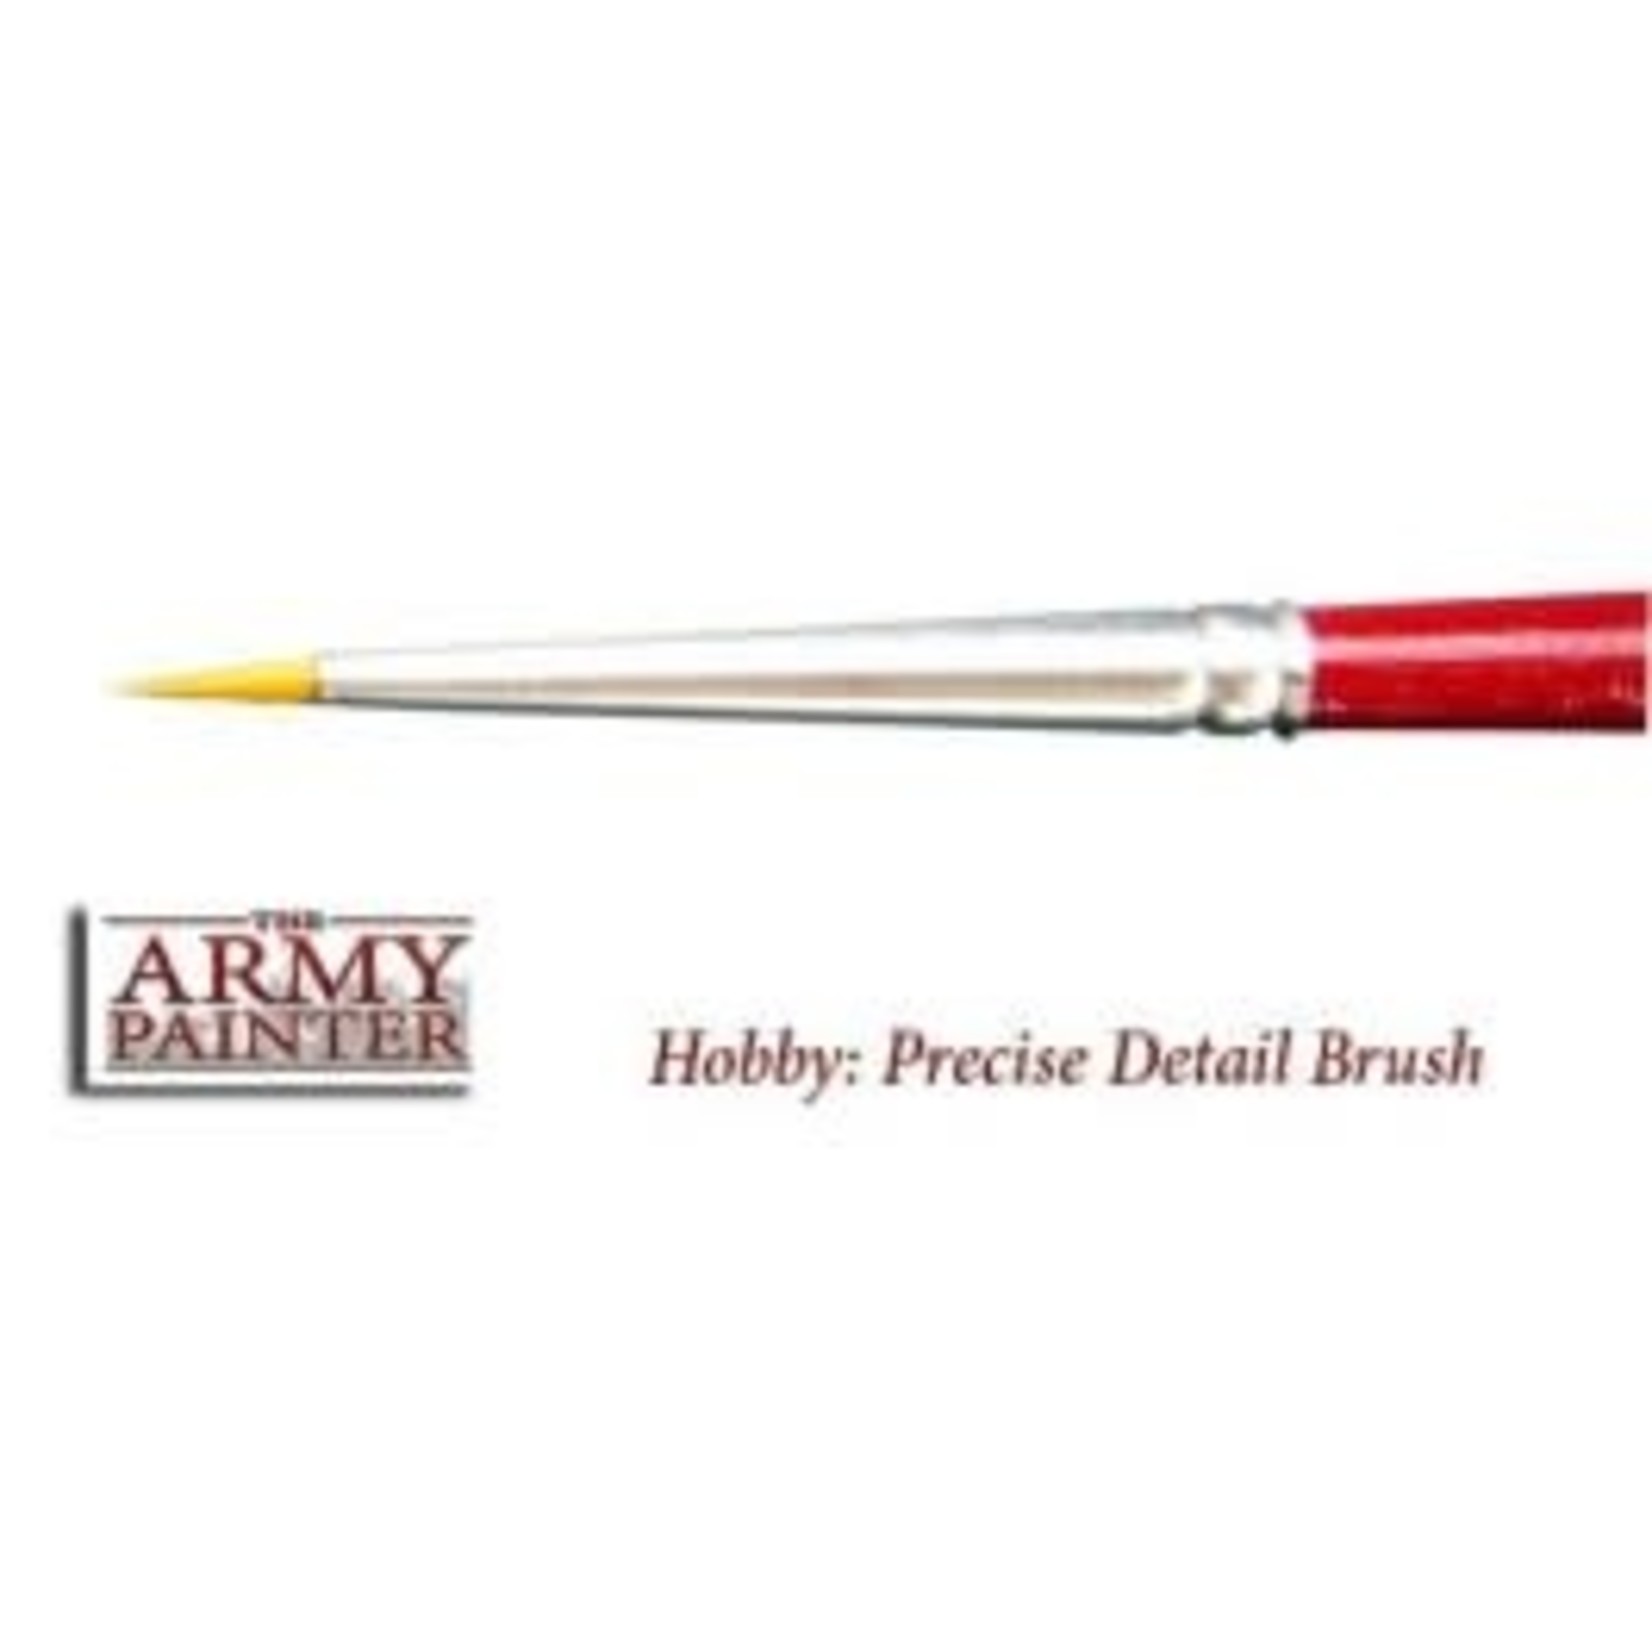 The Army Painter Hobby Precise Detail Paint Brush